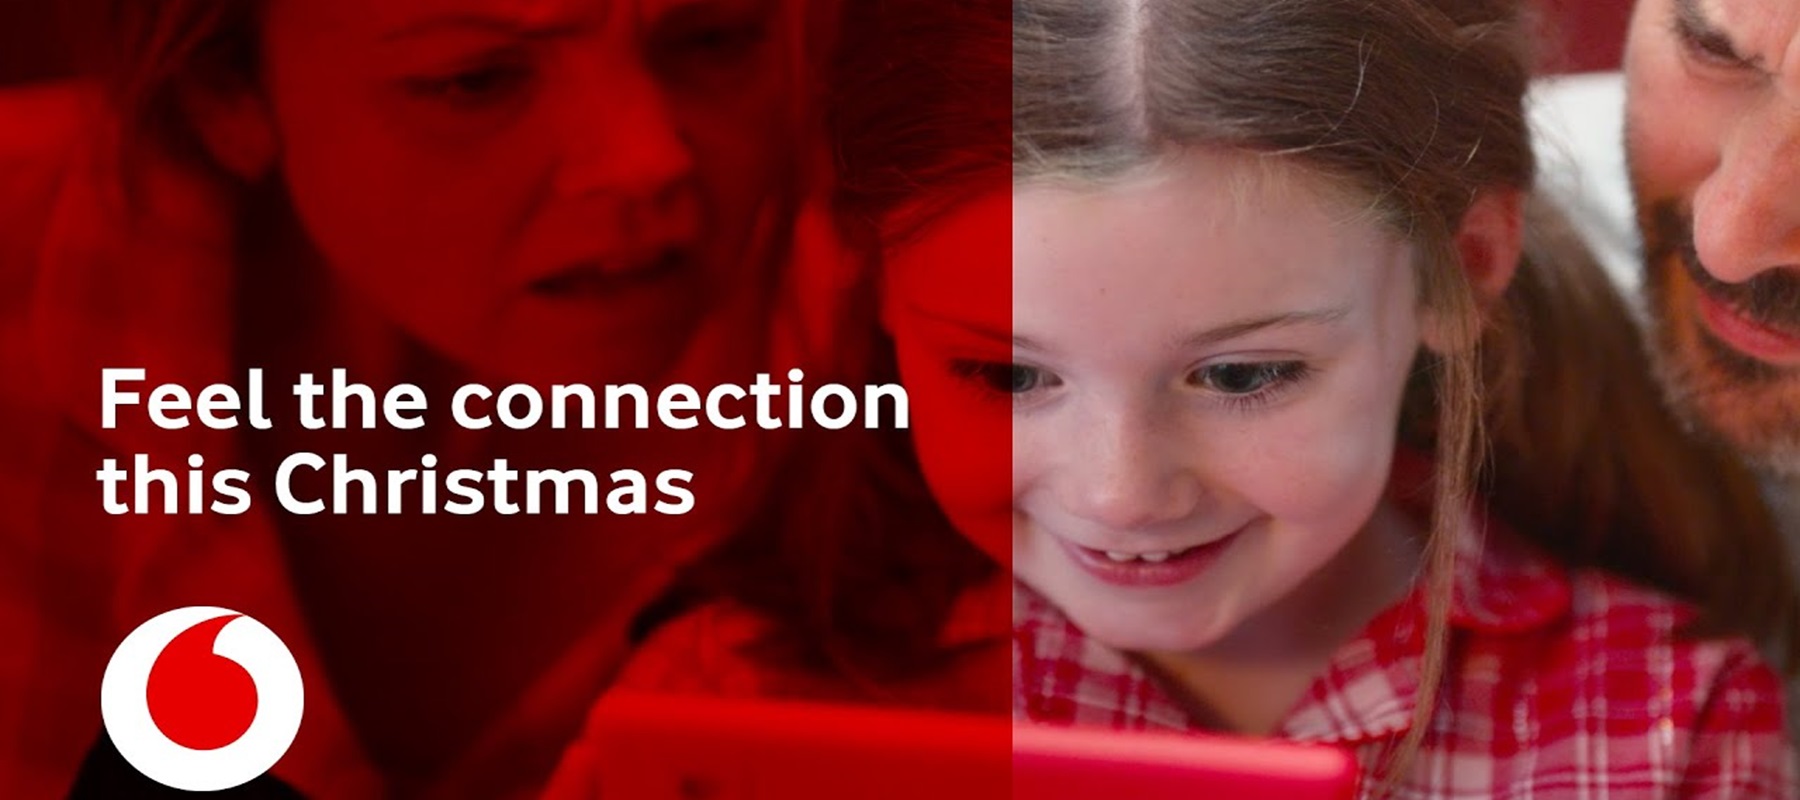 Vodafone's Christmas campaign celebrates the power of connection to bring joy this festive season